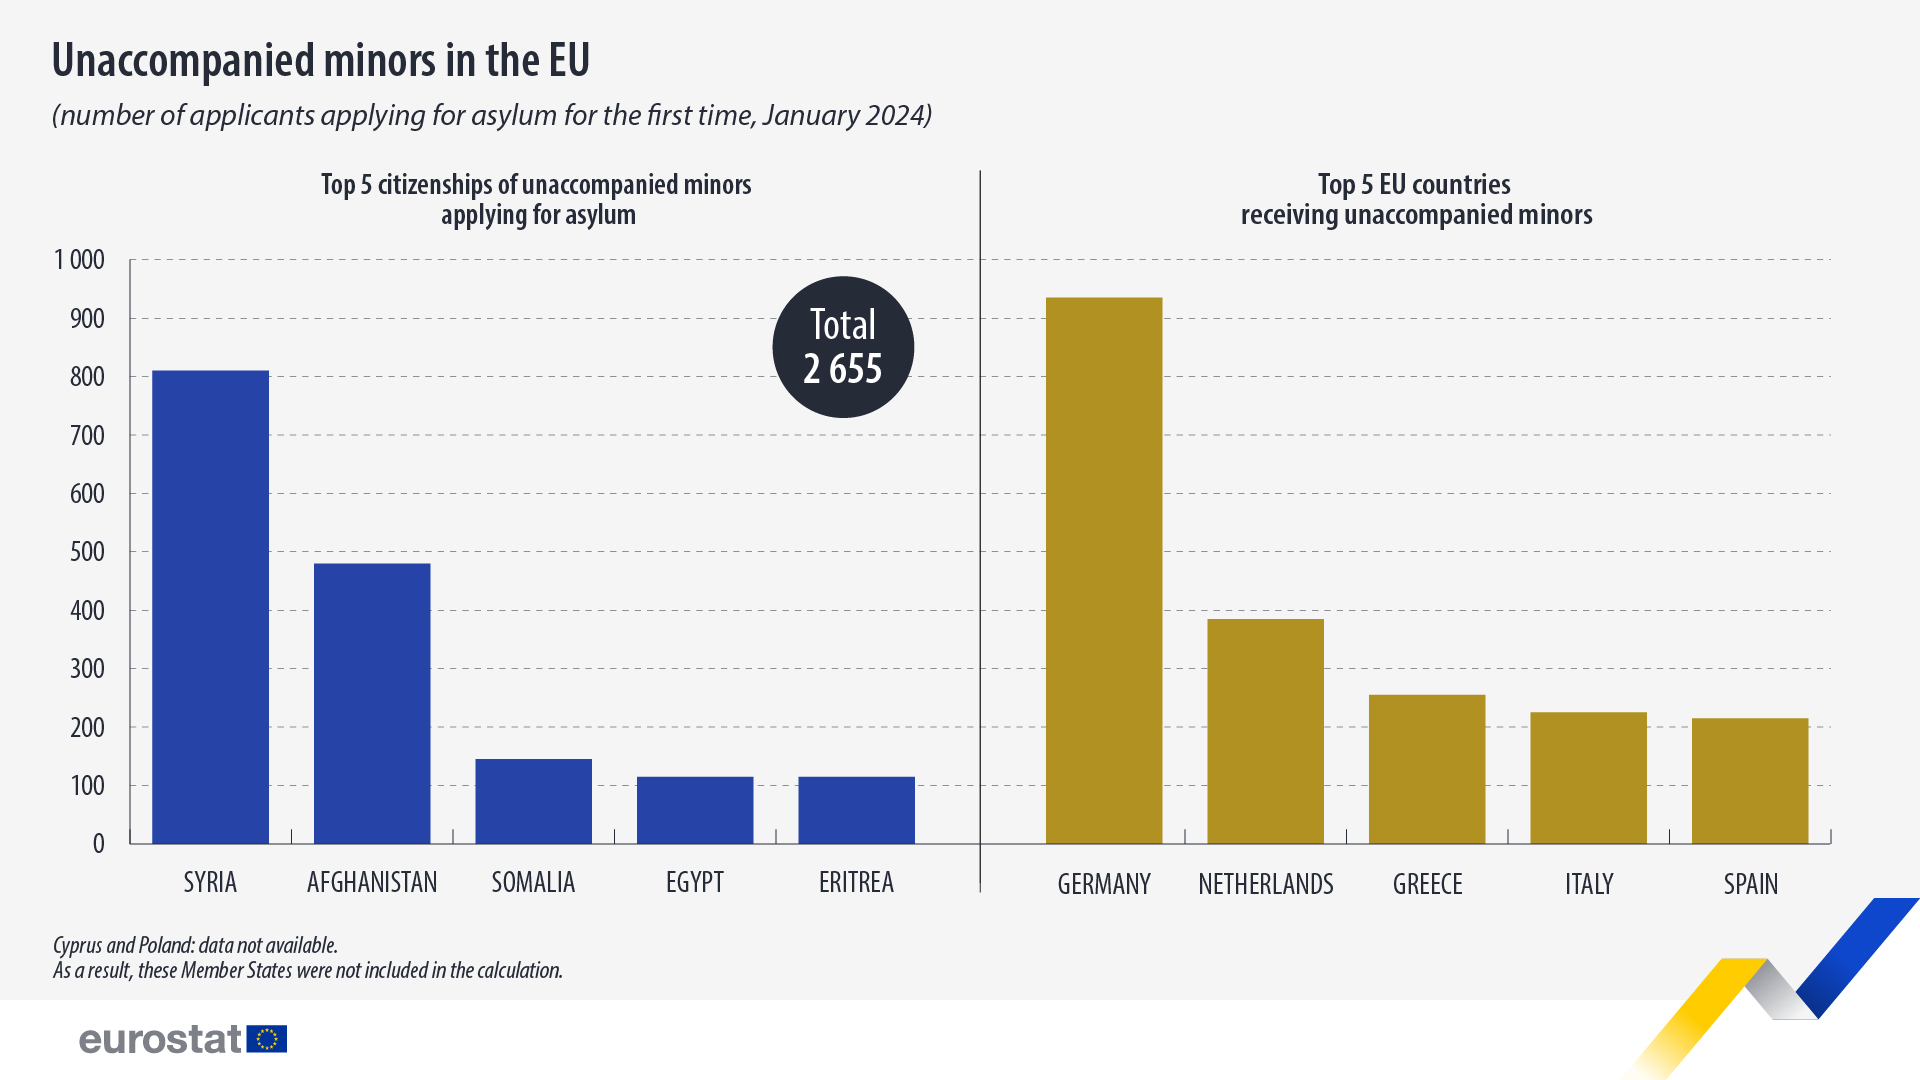 Unaccompanied minors in the EU, number of applicants applying for asylum for the first time, January 2024. Chart. See link to full dataset below.